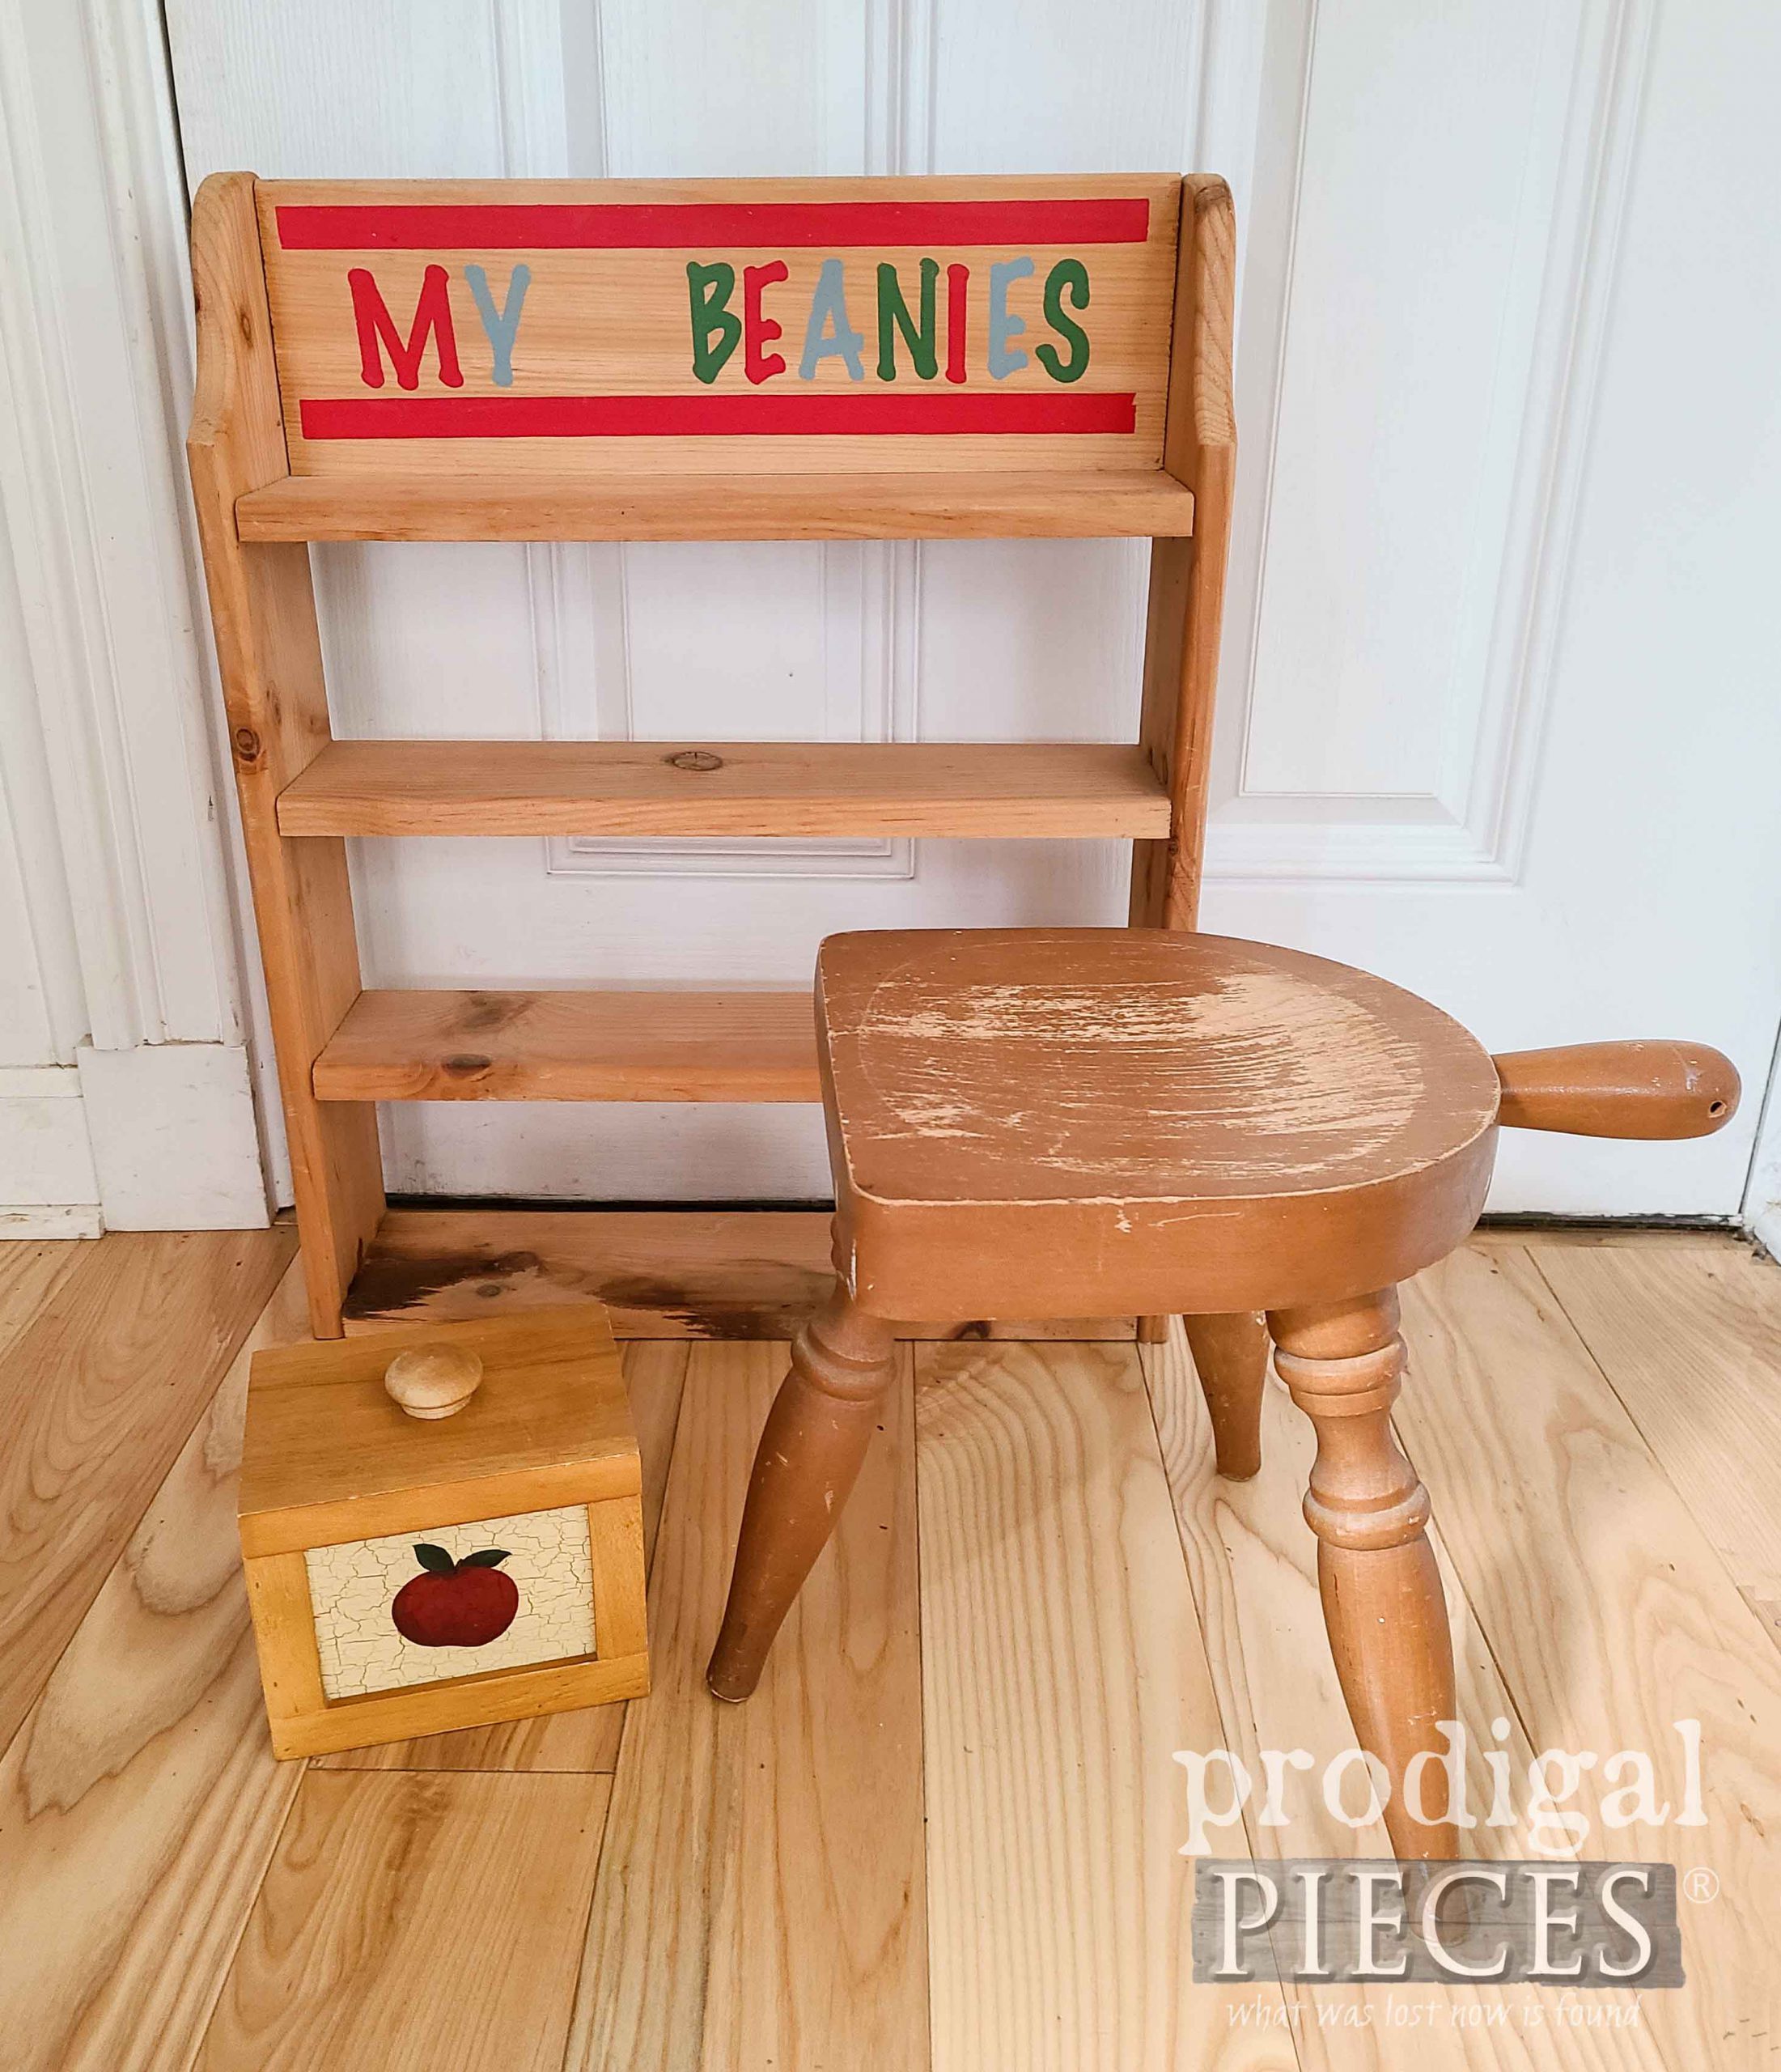 Thrifted Wooden Items Before Mini Farmhouse Makeovers by Prodigal Pieces | prodigalpieces.com